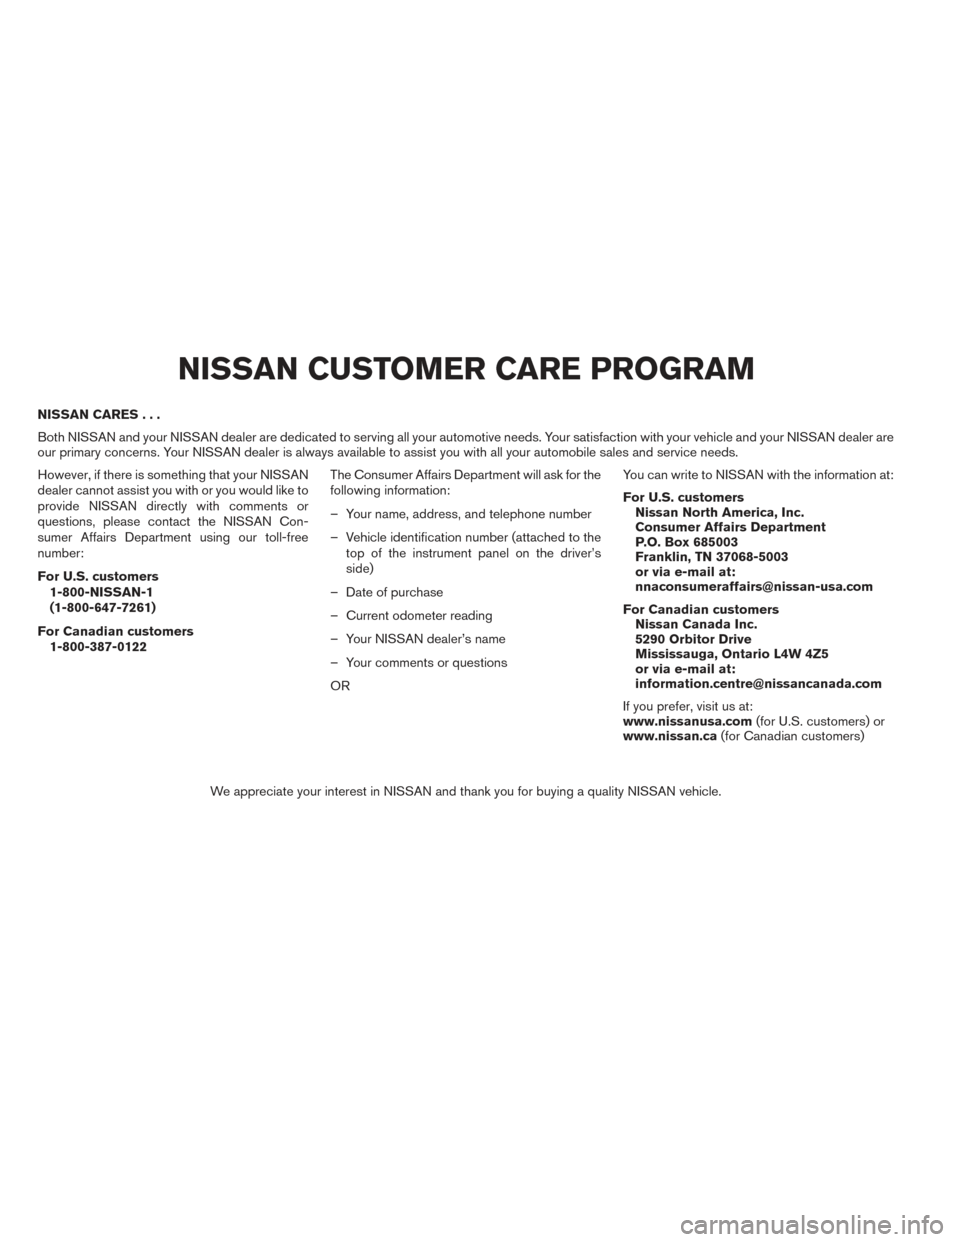 NISSAN MAXIMA 2014 A35 / 7.G Owners Manual NISSAN CARES...
Both NISSAN and your NISSAN dealer are dedicated to serving all your automotive needs. Your satisfaction with your vehicle and your NISSAN dealer are
our primary concerns. Your NISSAN 